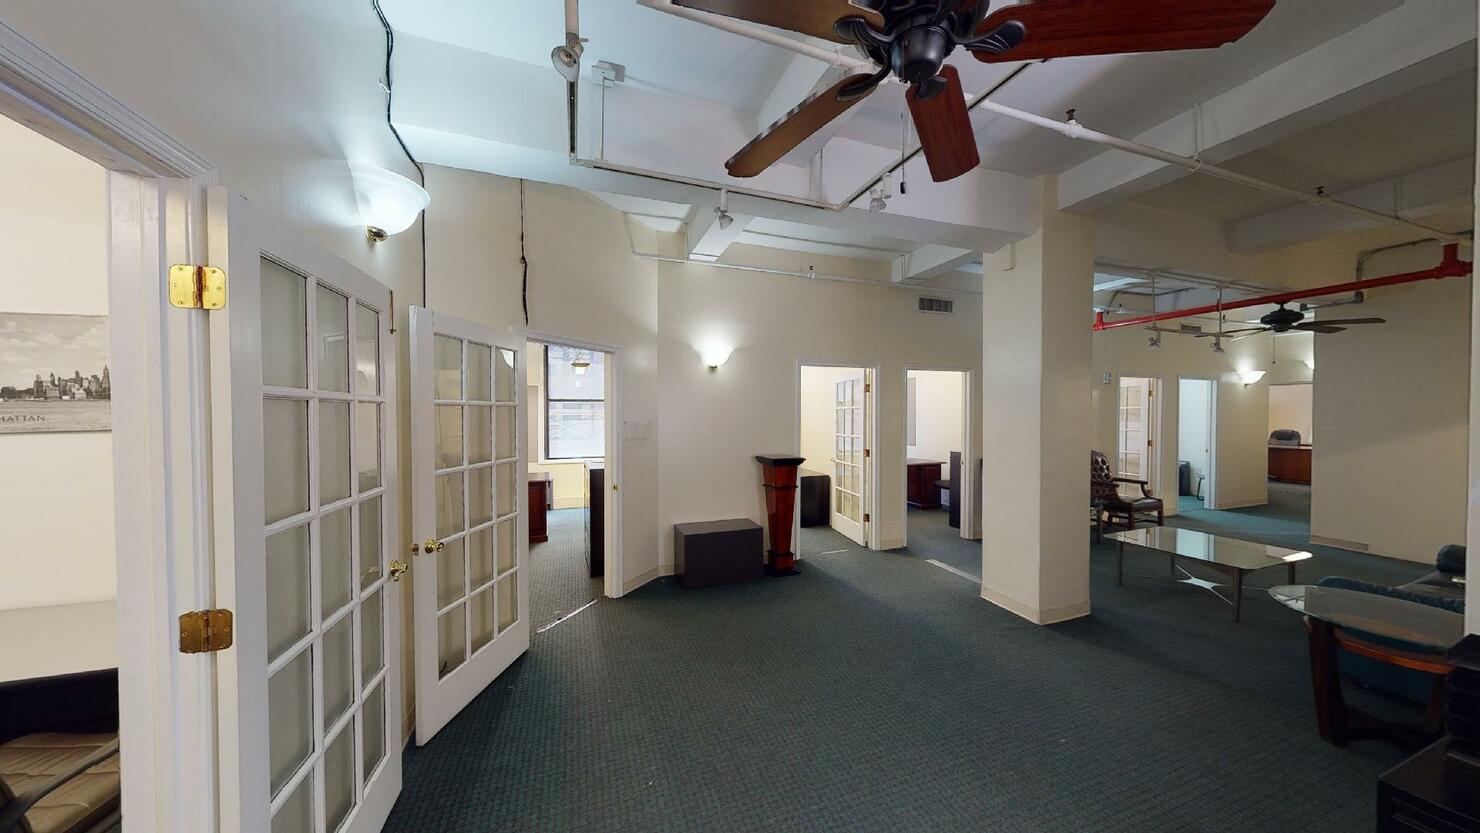 247 West 35th Street, NYC, Partial 5th Floor - 3300 Square Ft office with abundant natural light